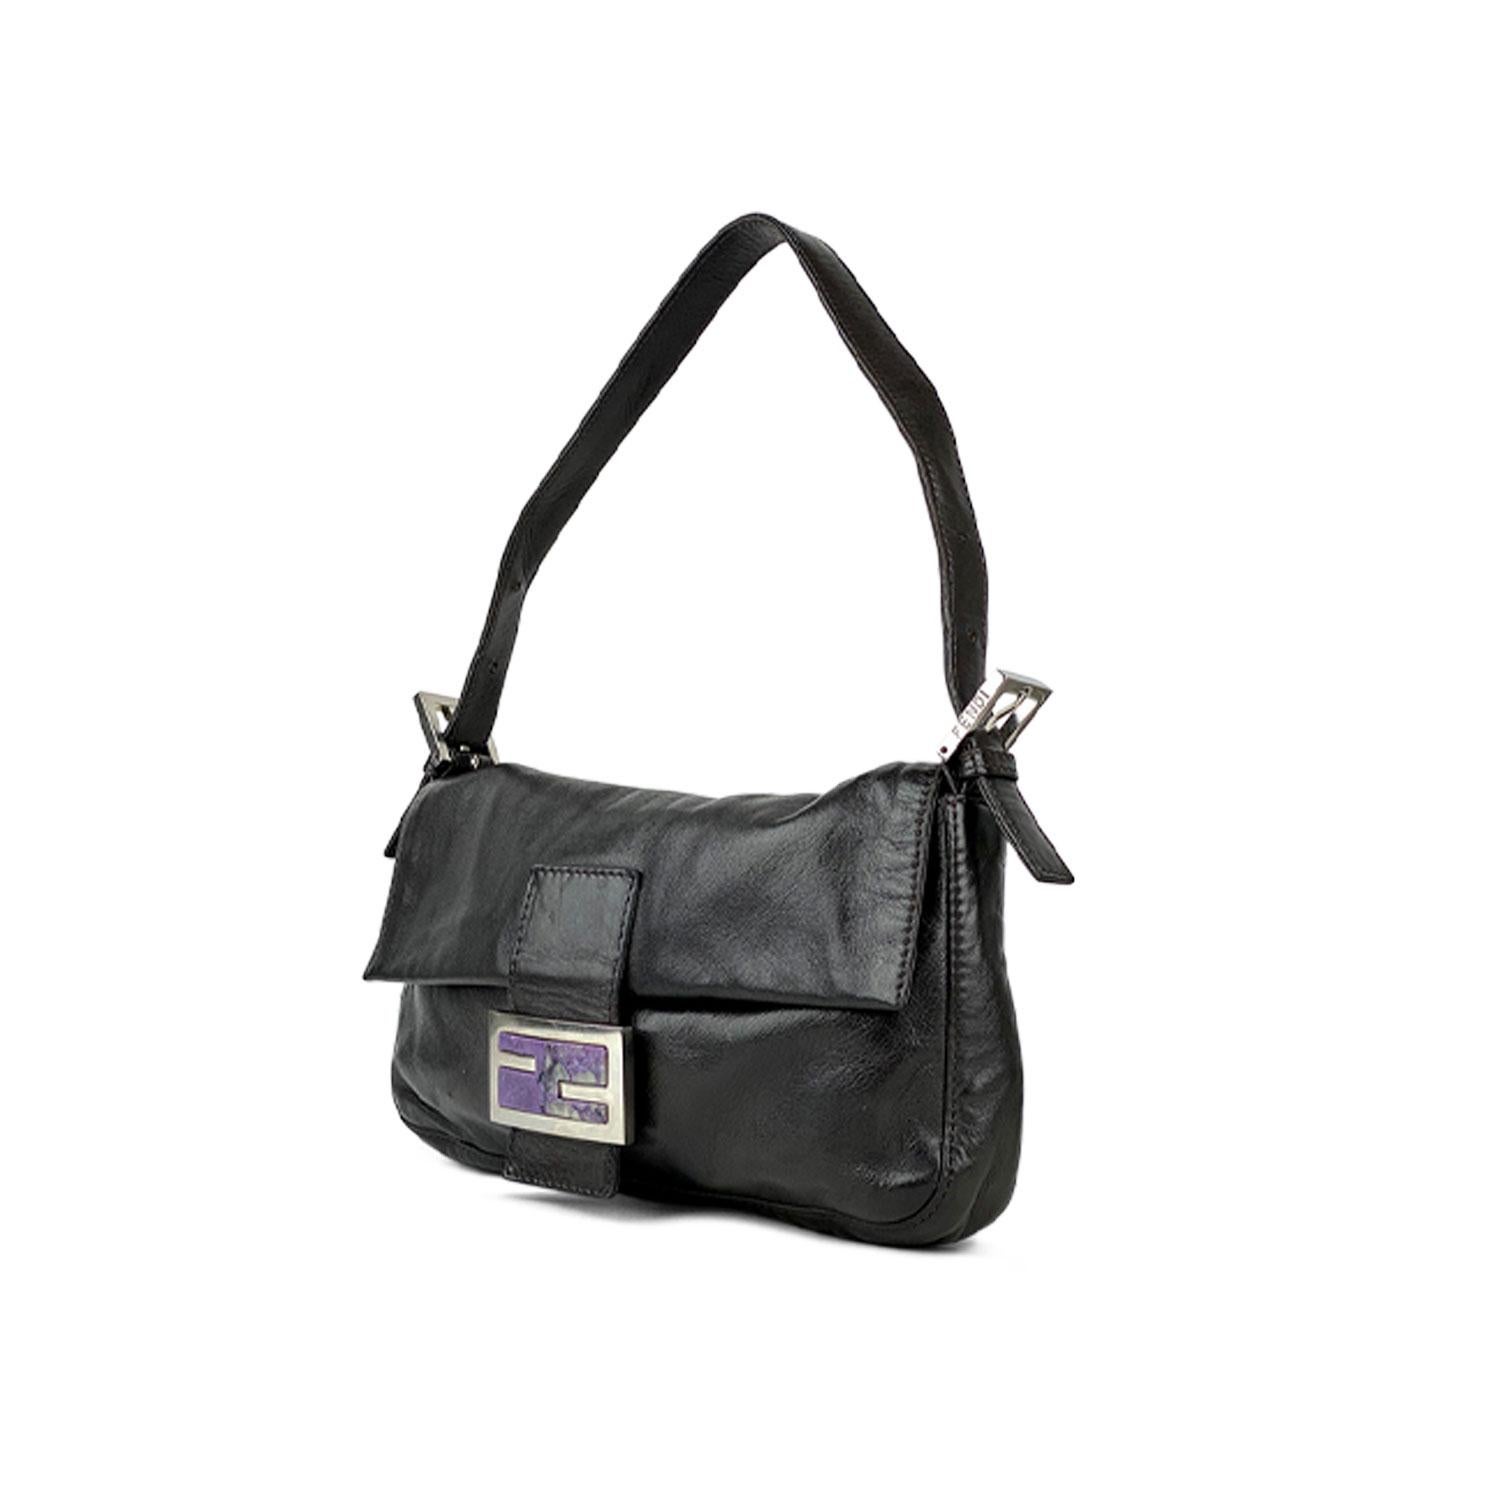 Dark Brown Nappa leather Fendi Baguette with

- Silver-tone hardware
- Single flat leather shoulder strap
- Purple suede interior lining
- Single zip pocket at interior wall and magnetic snap closure at front flap featuring logo adornment

Overall